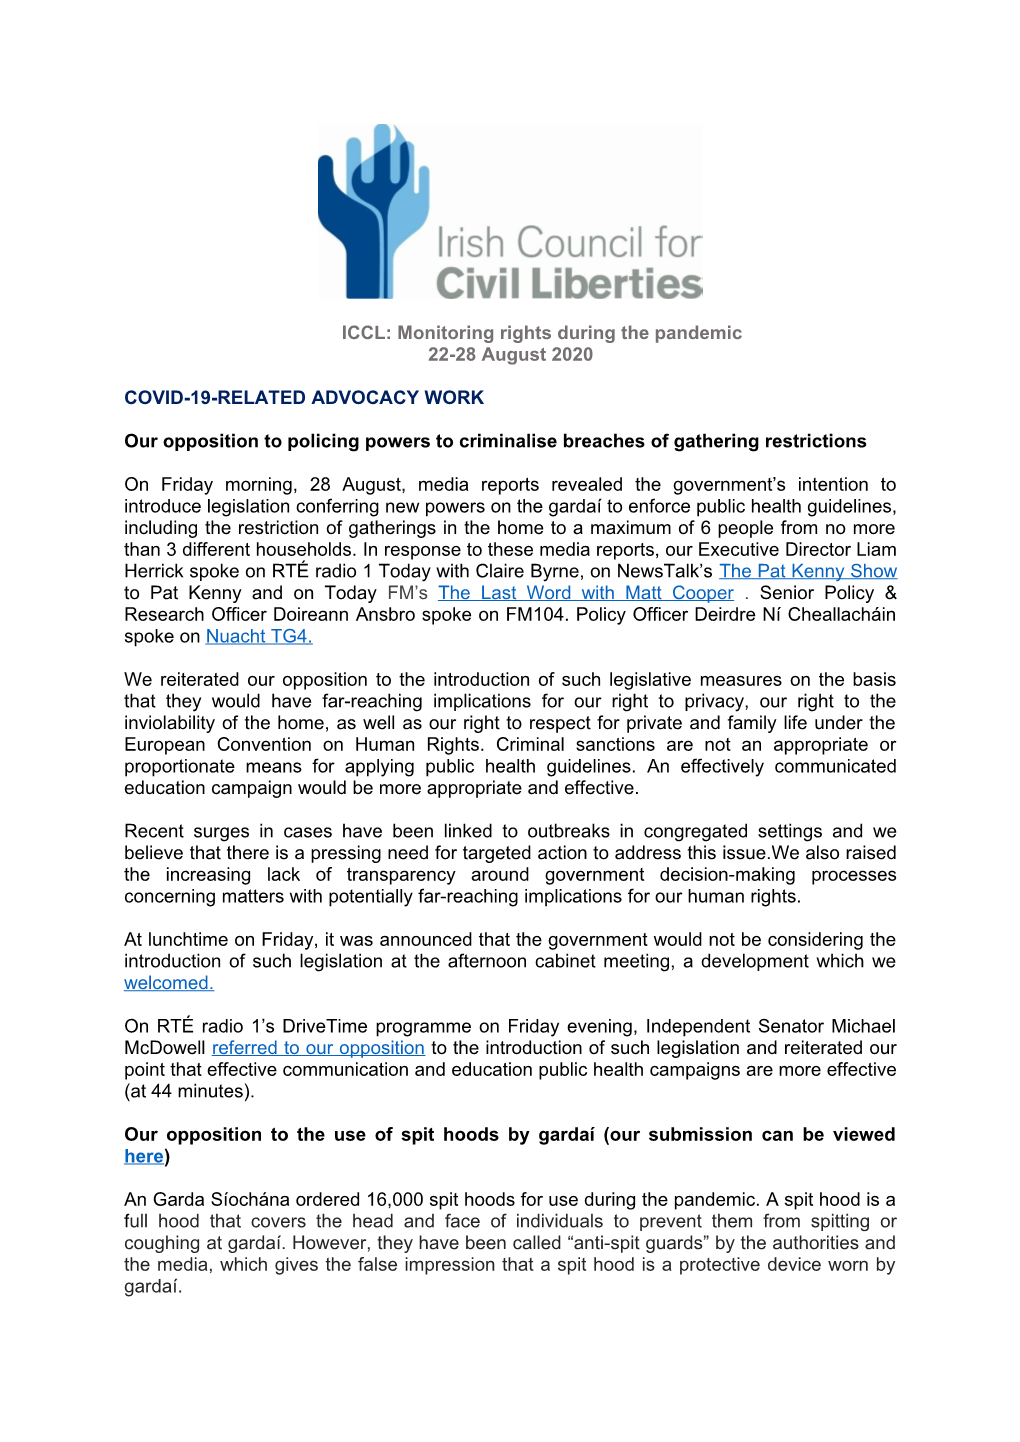 ICCL: Monitoring Rights During the Pandemic 22-28 August 2020